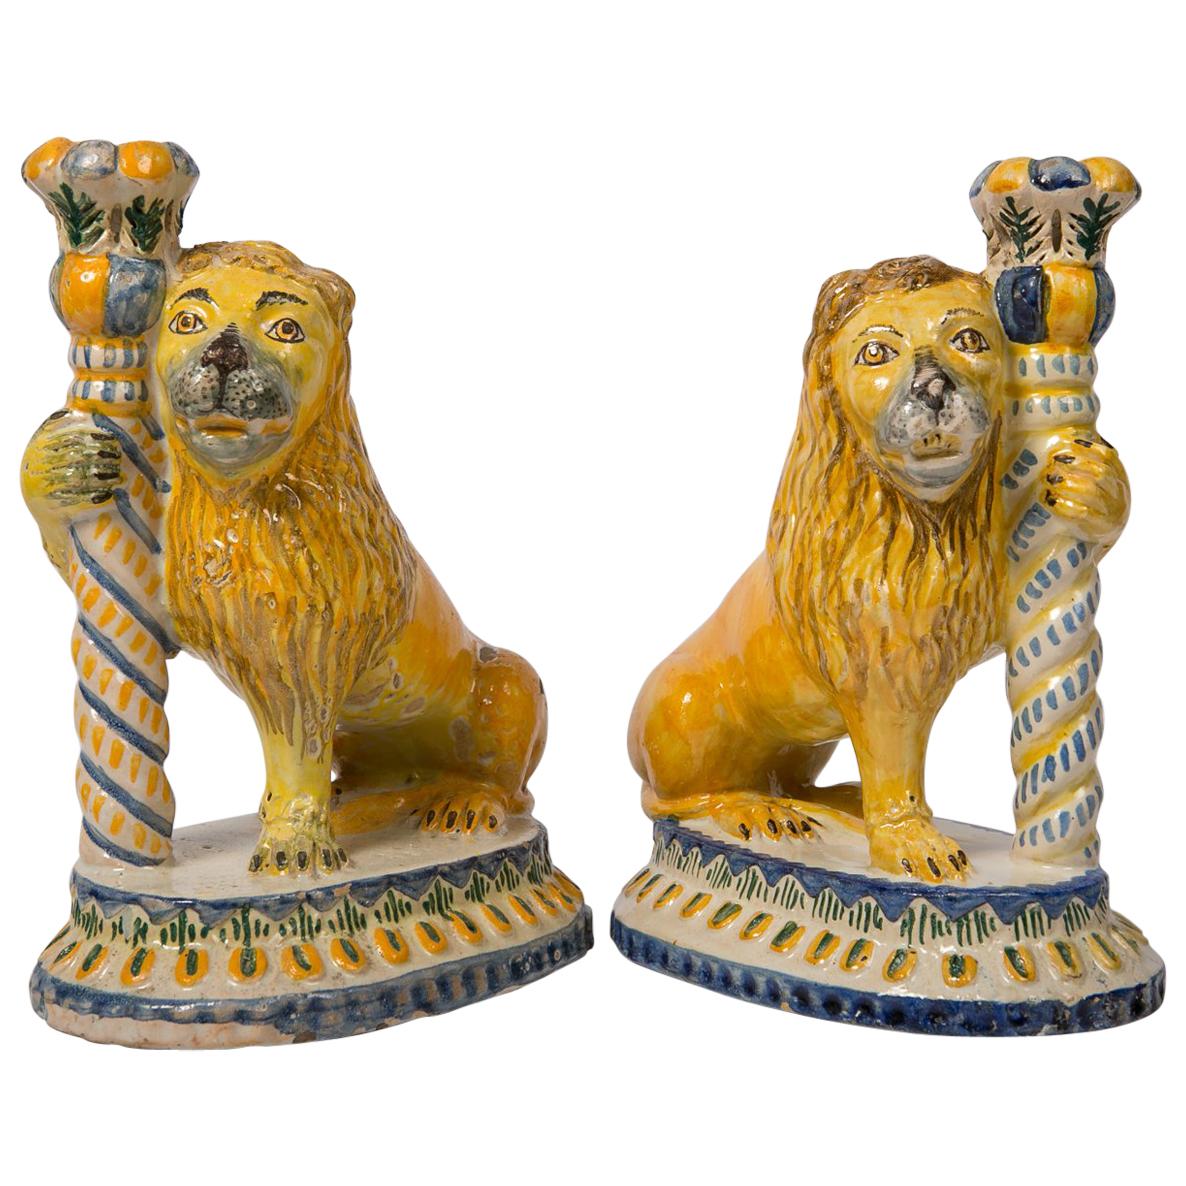 Pair of Antique Faience Lions Mid-19th Century